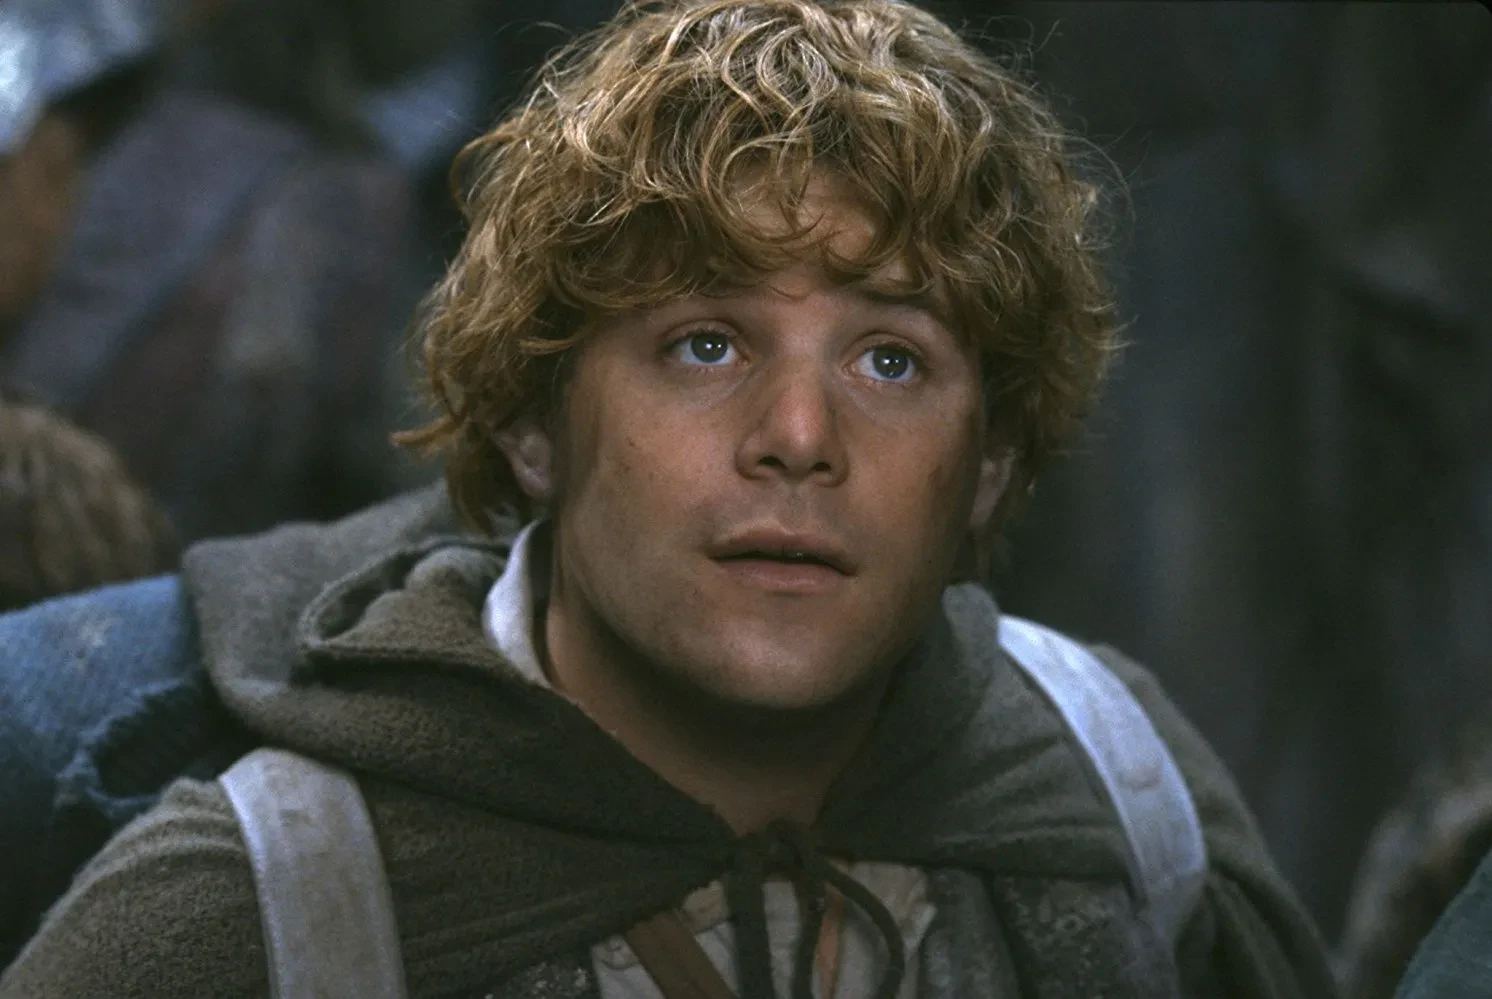 Sean Astin in The Lord of the Rings